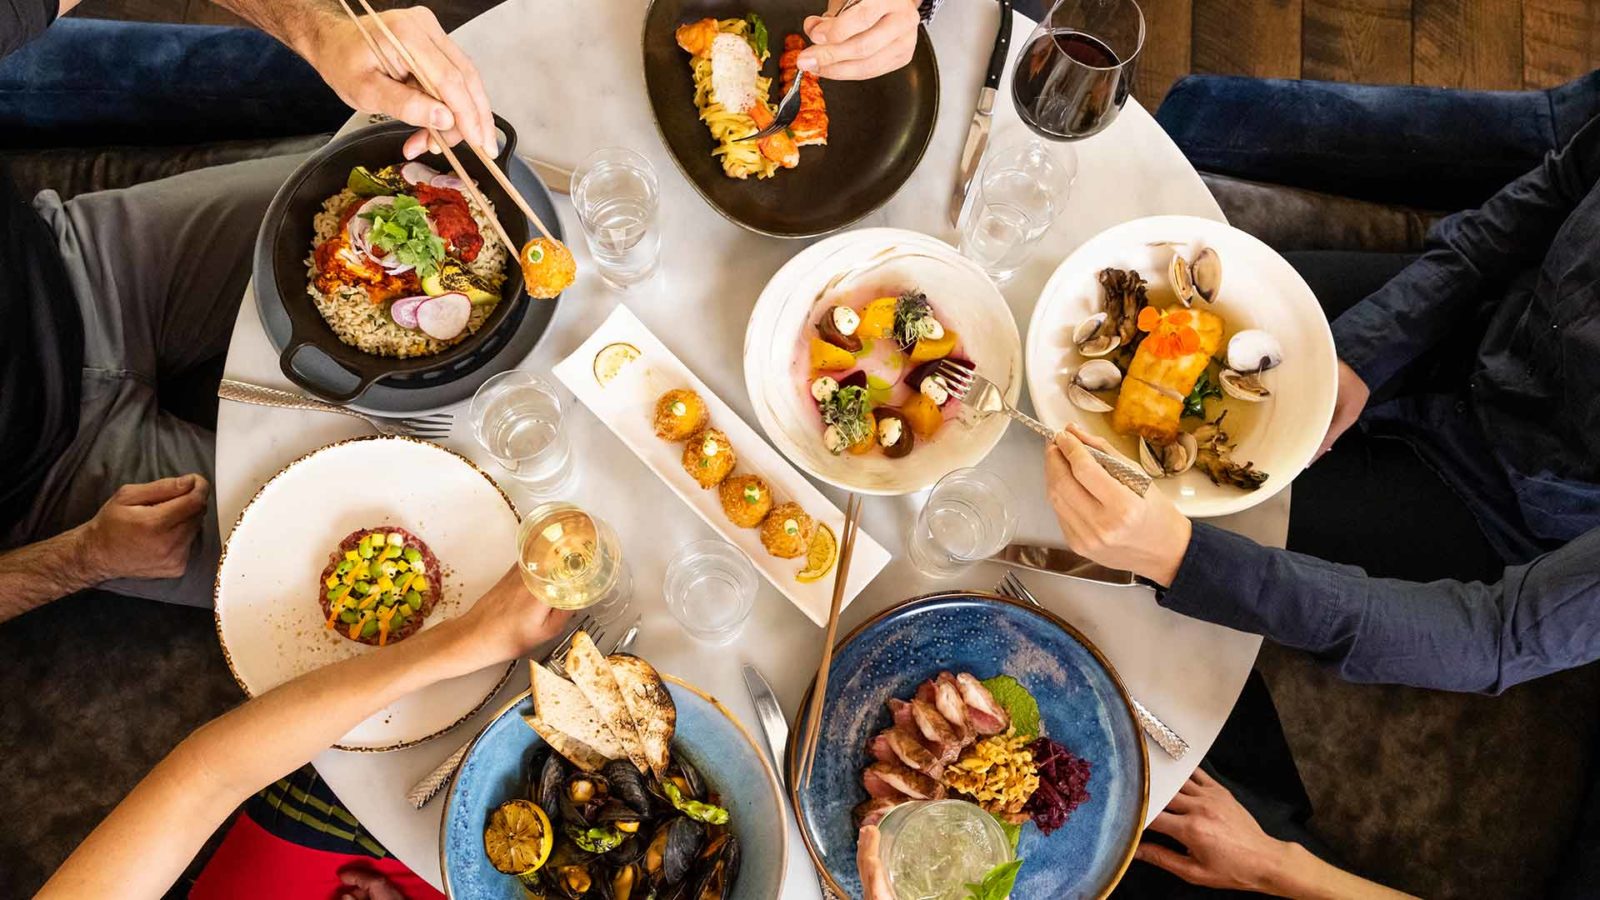 Slope Room : Farm to Table Restaurant in Vail